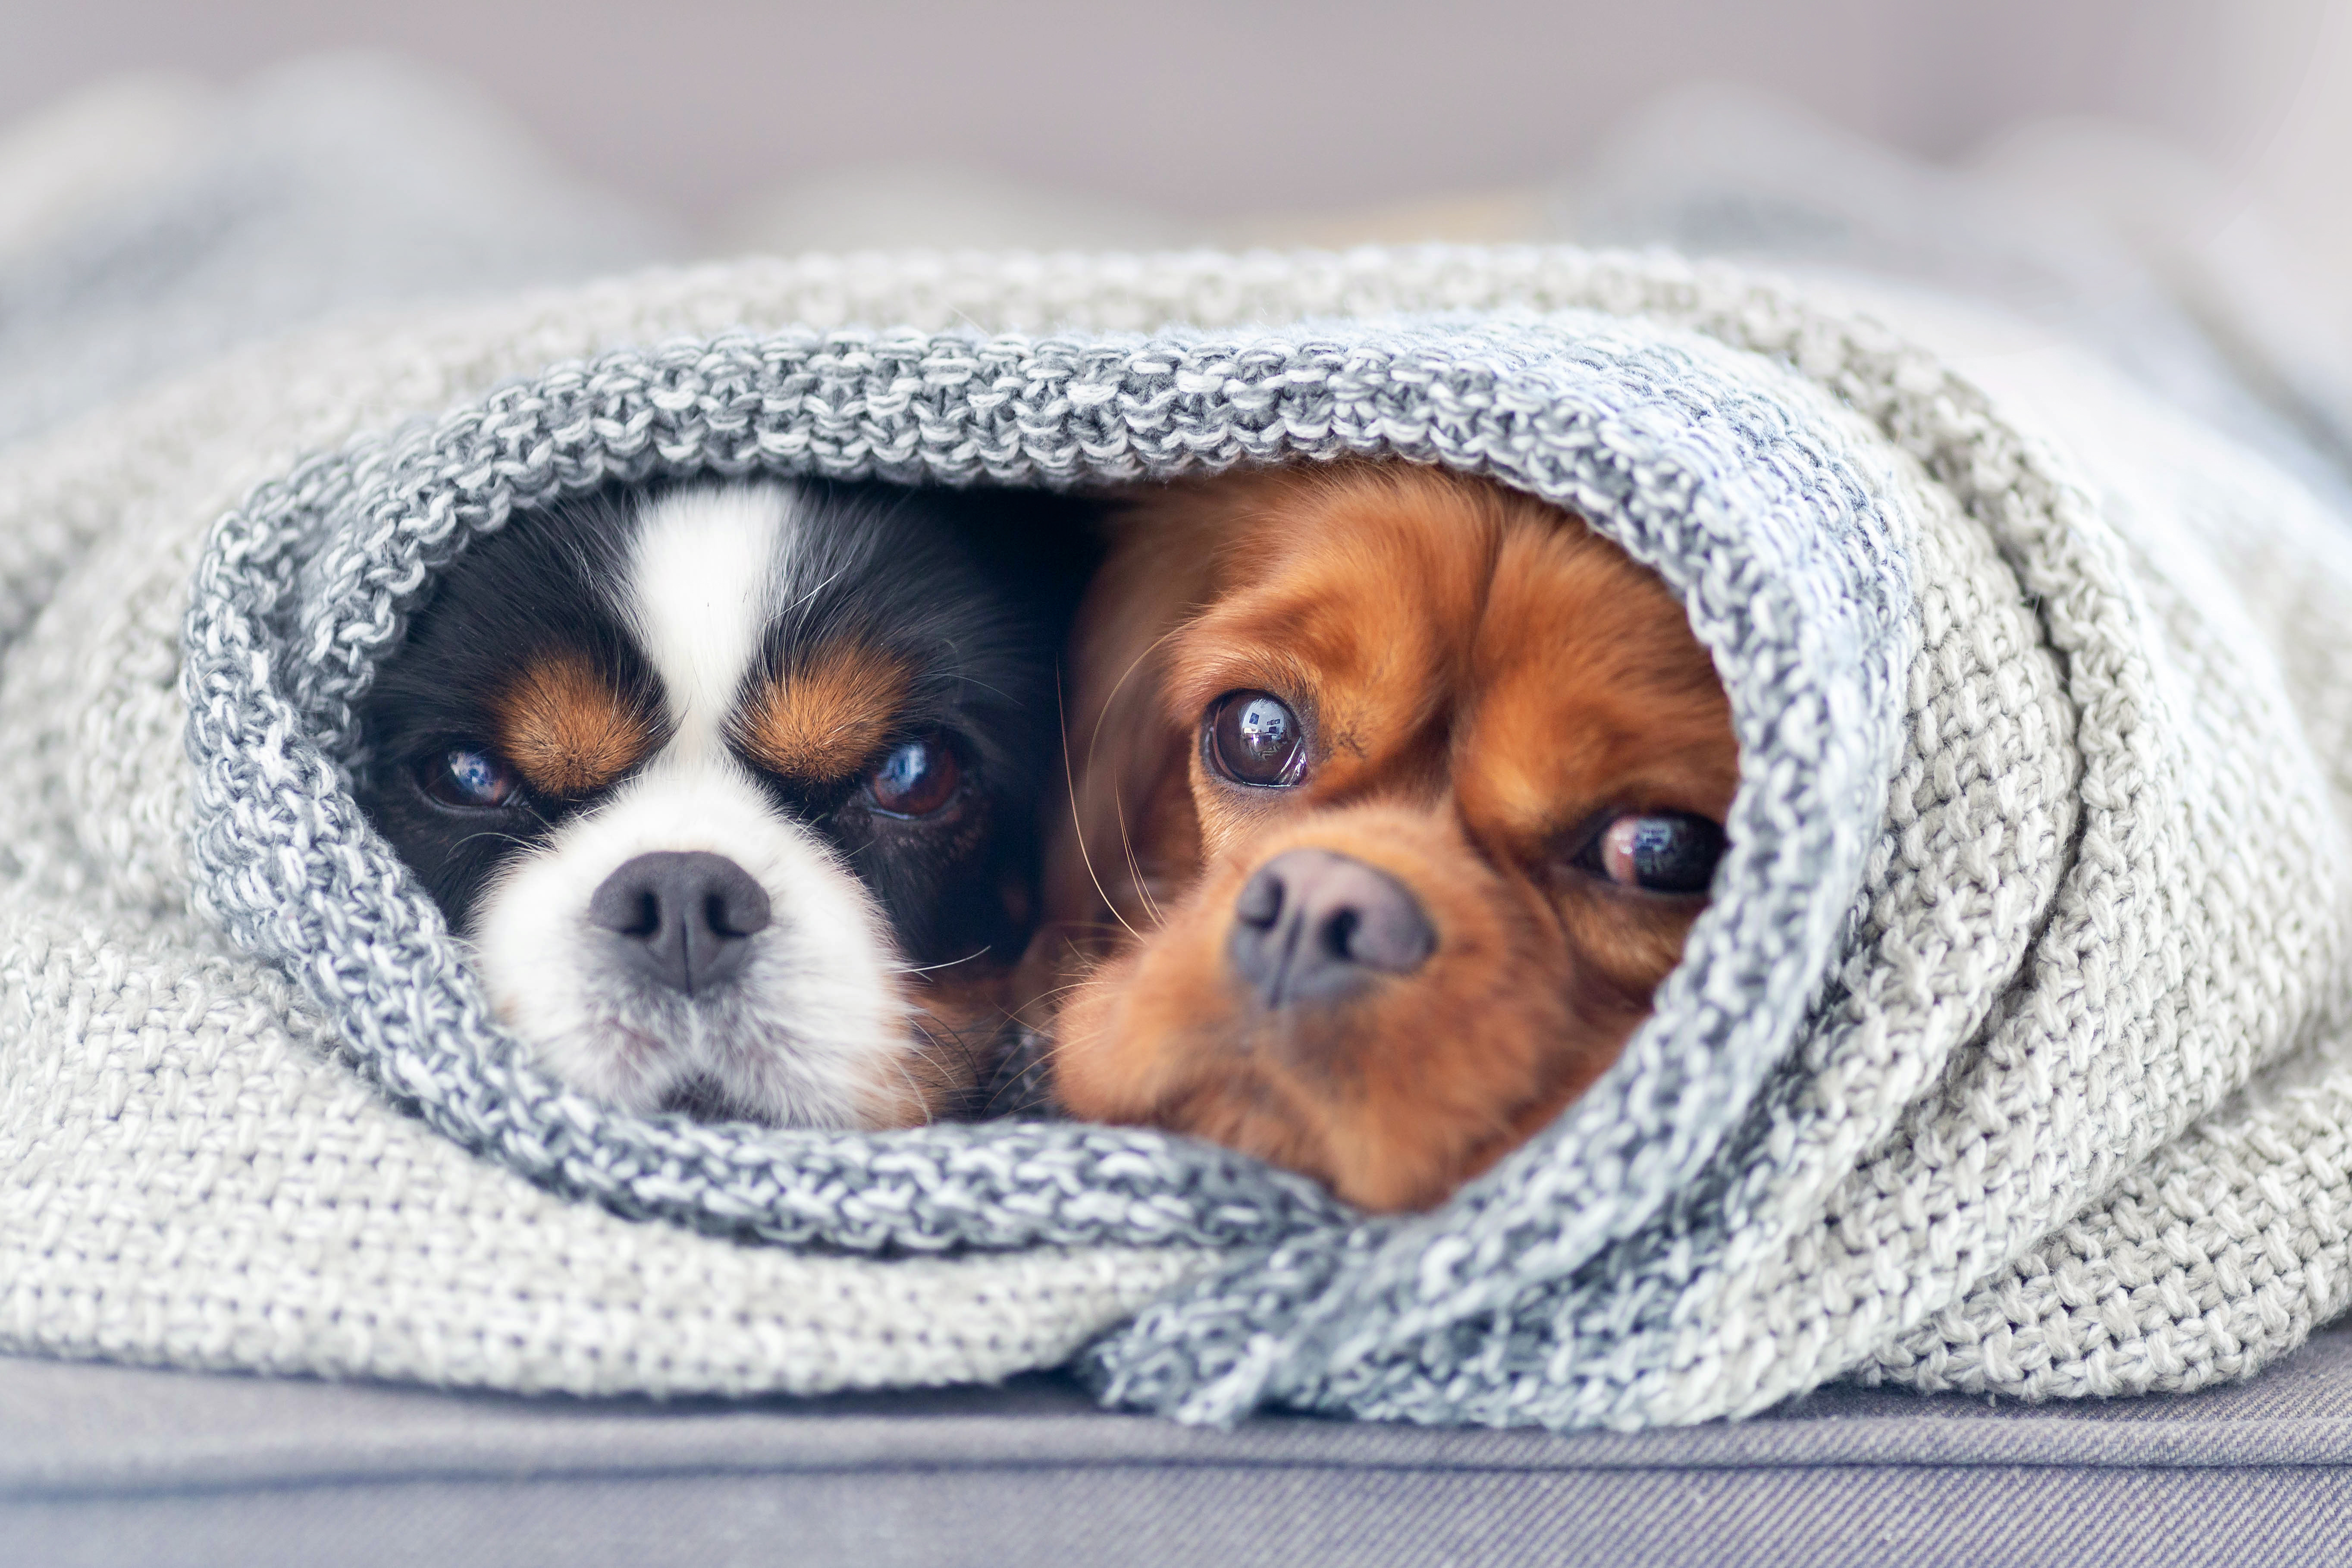 Two dogs under the blanket